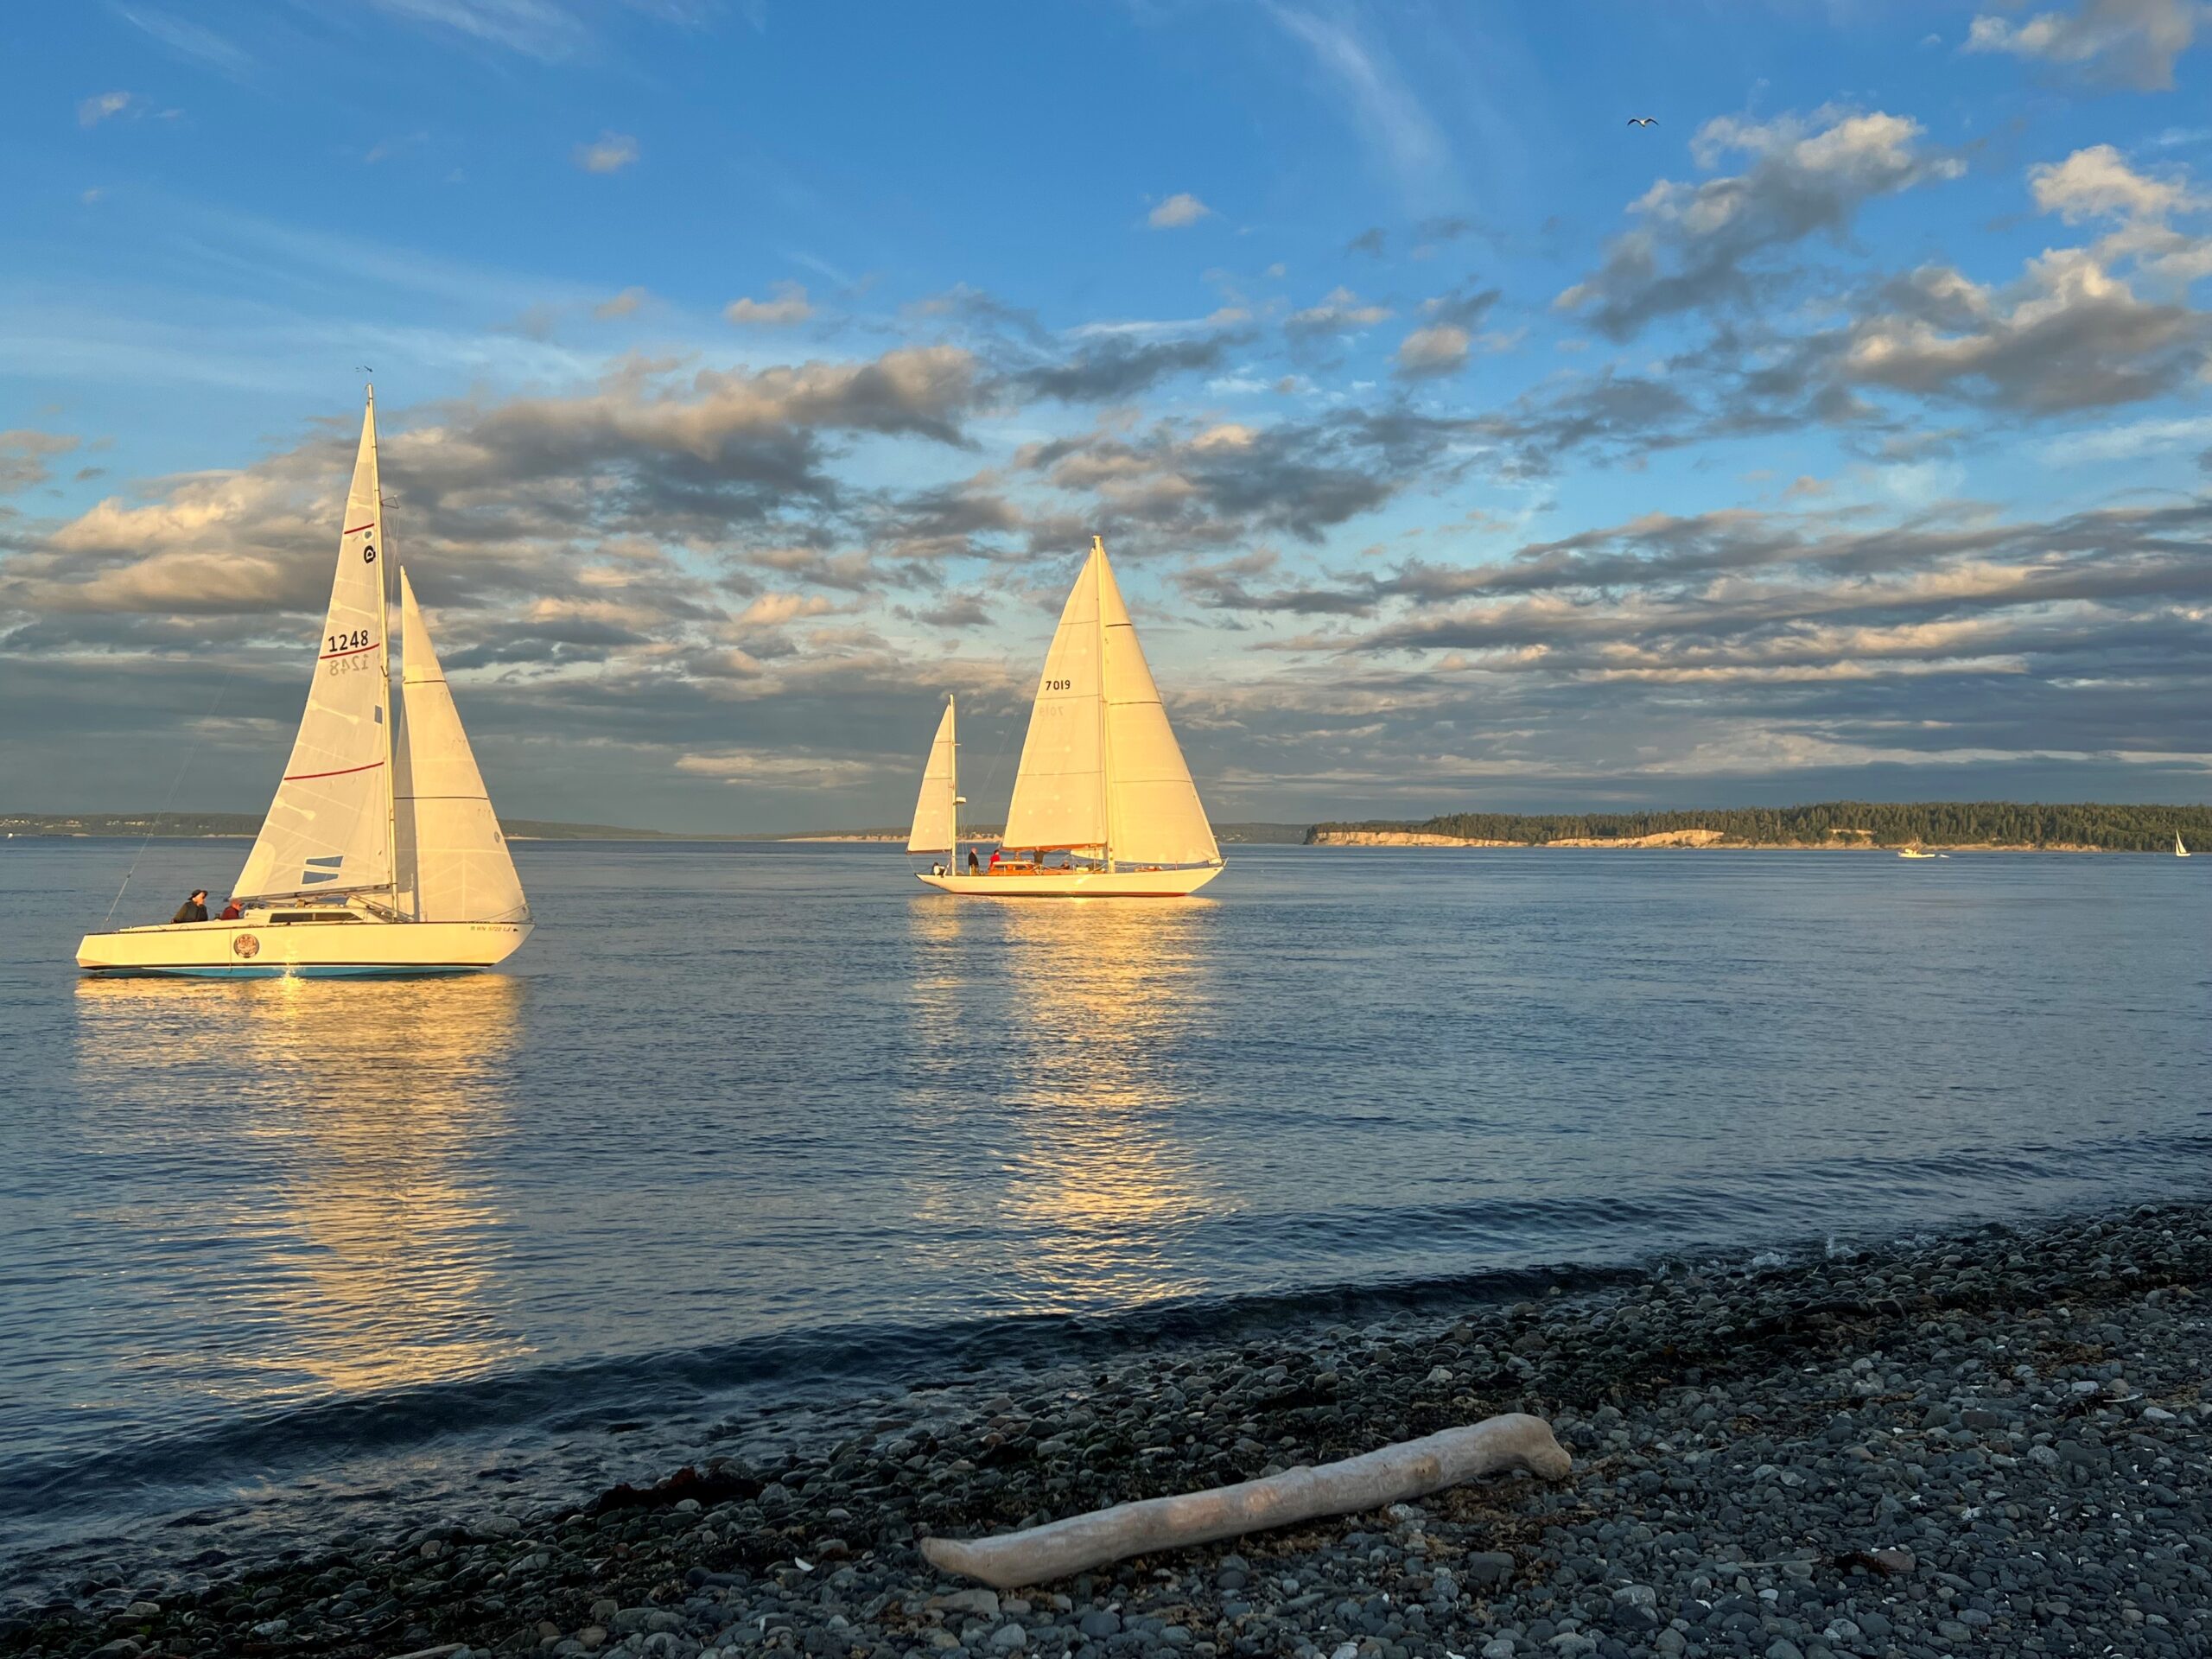 Experience the best of maritime Port Townsend by watching the sailboats at sunset off Point Hudson.